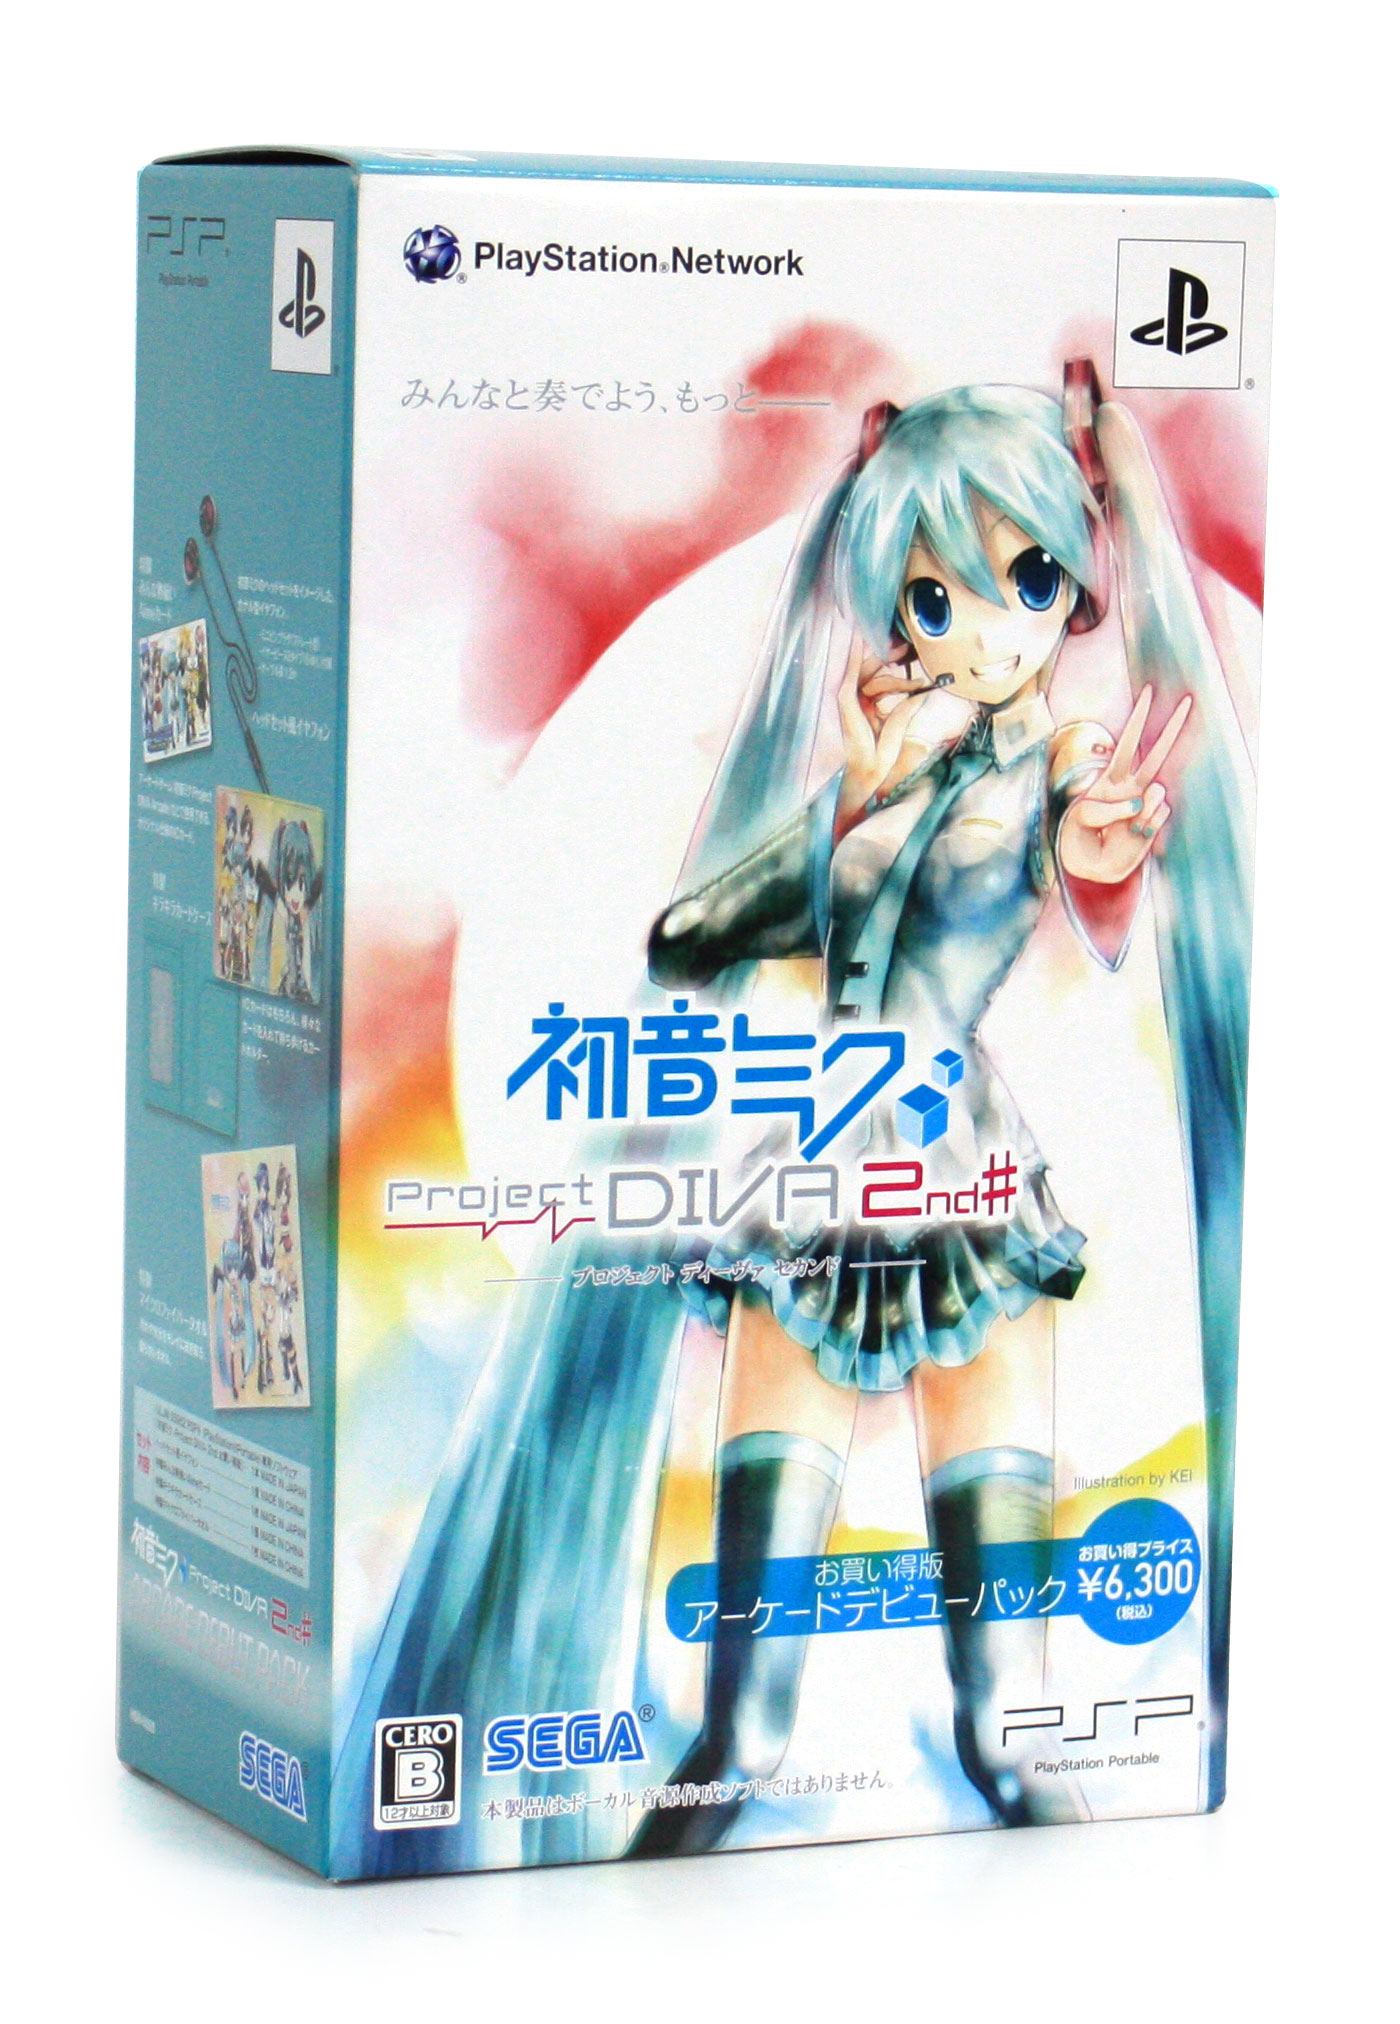 Hatsune Miku Project Diva 2nd Low Price Edition Arcade Debut